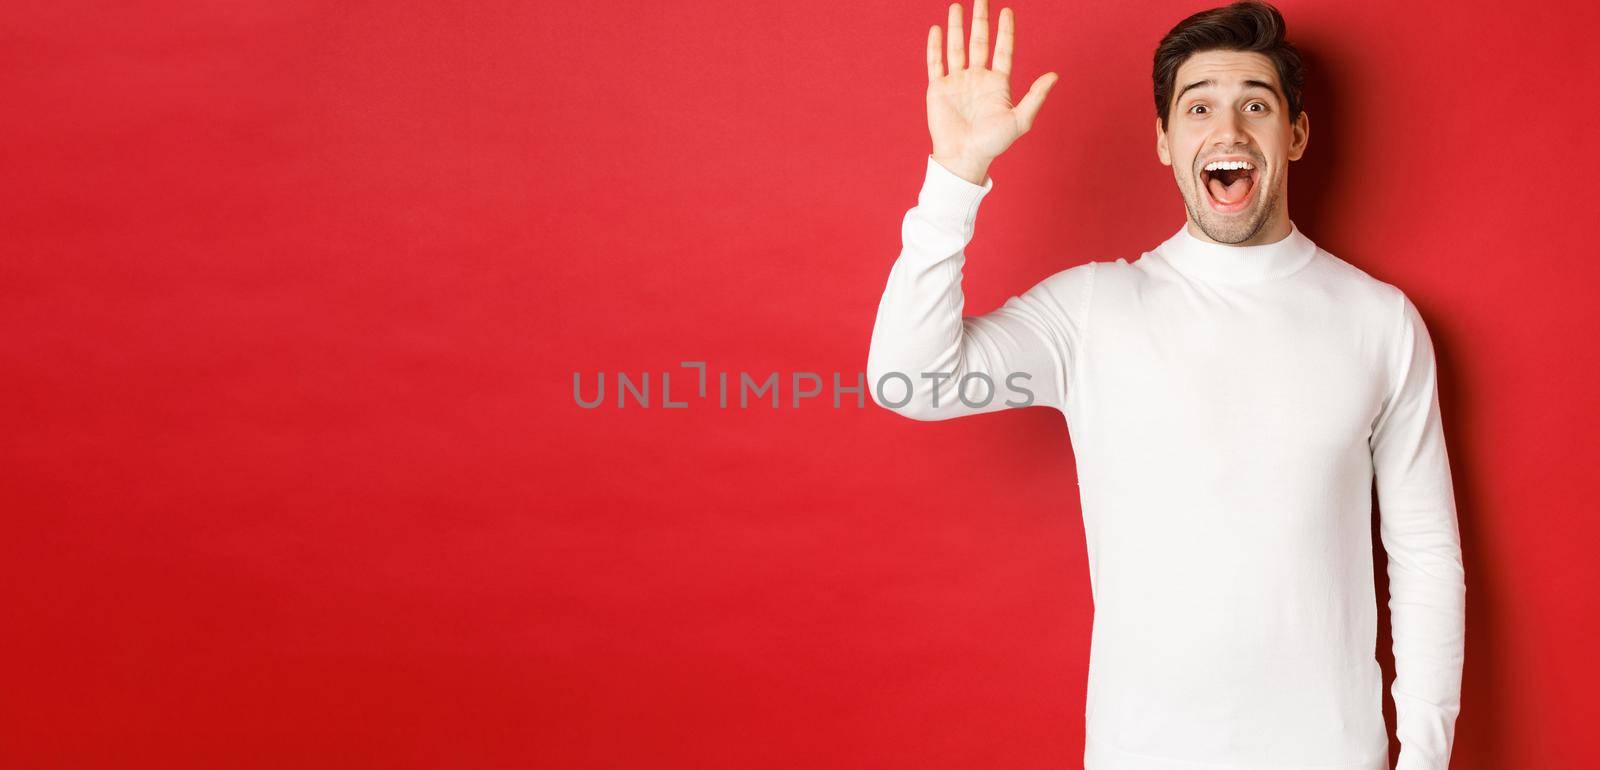 Image of happy and friendly young man saying hello, waving hand to greet someone, standing over red background.